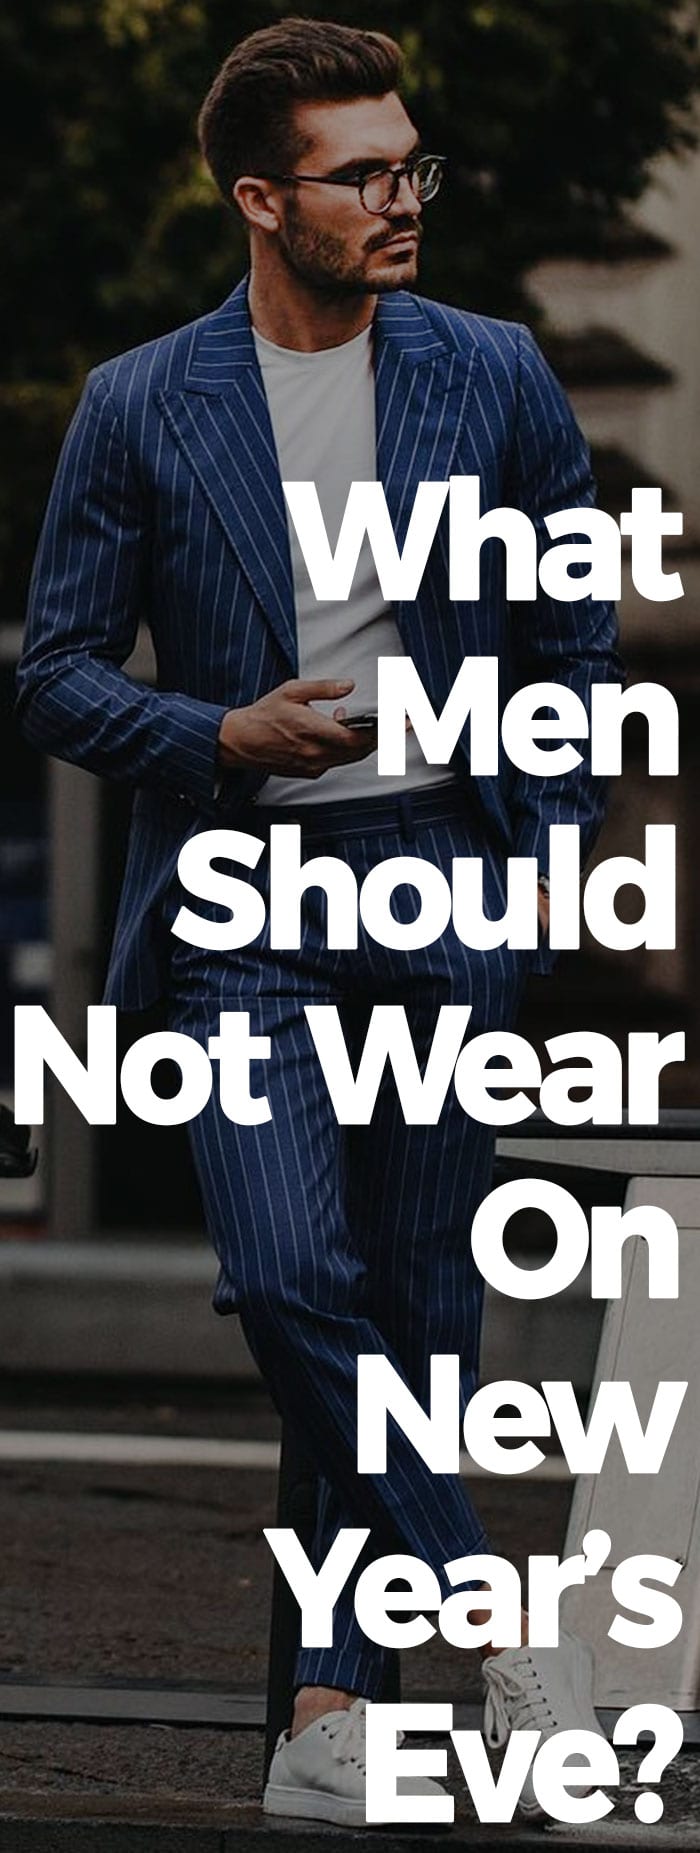 What Men Should Not Wear On New Year's Eve